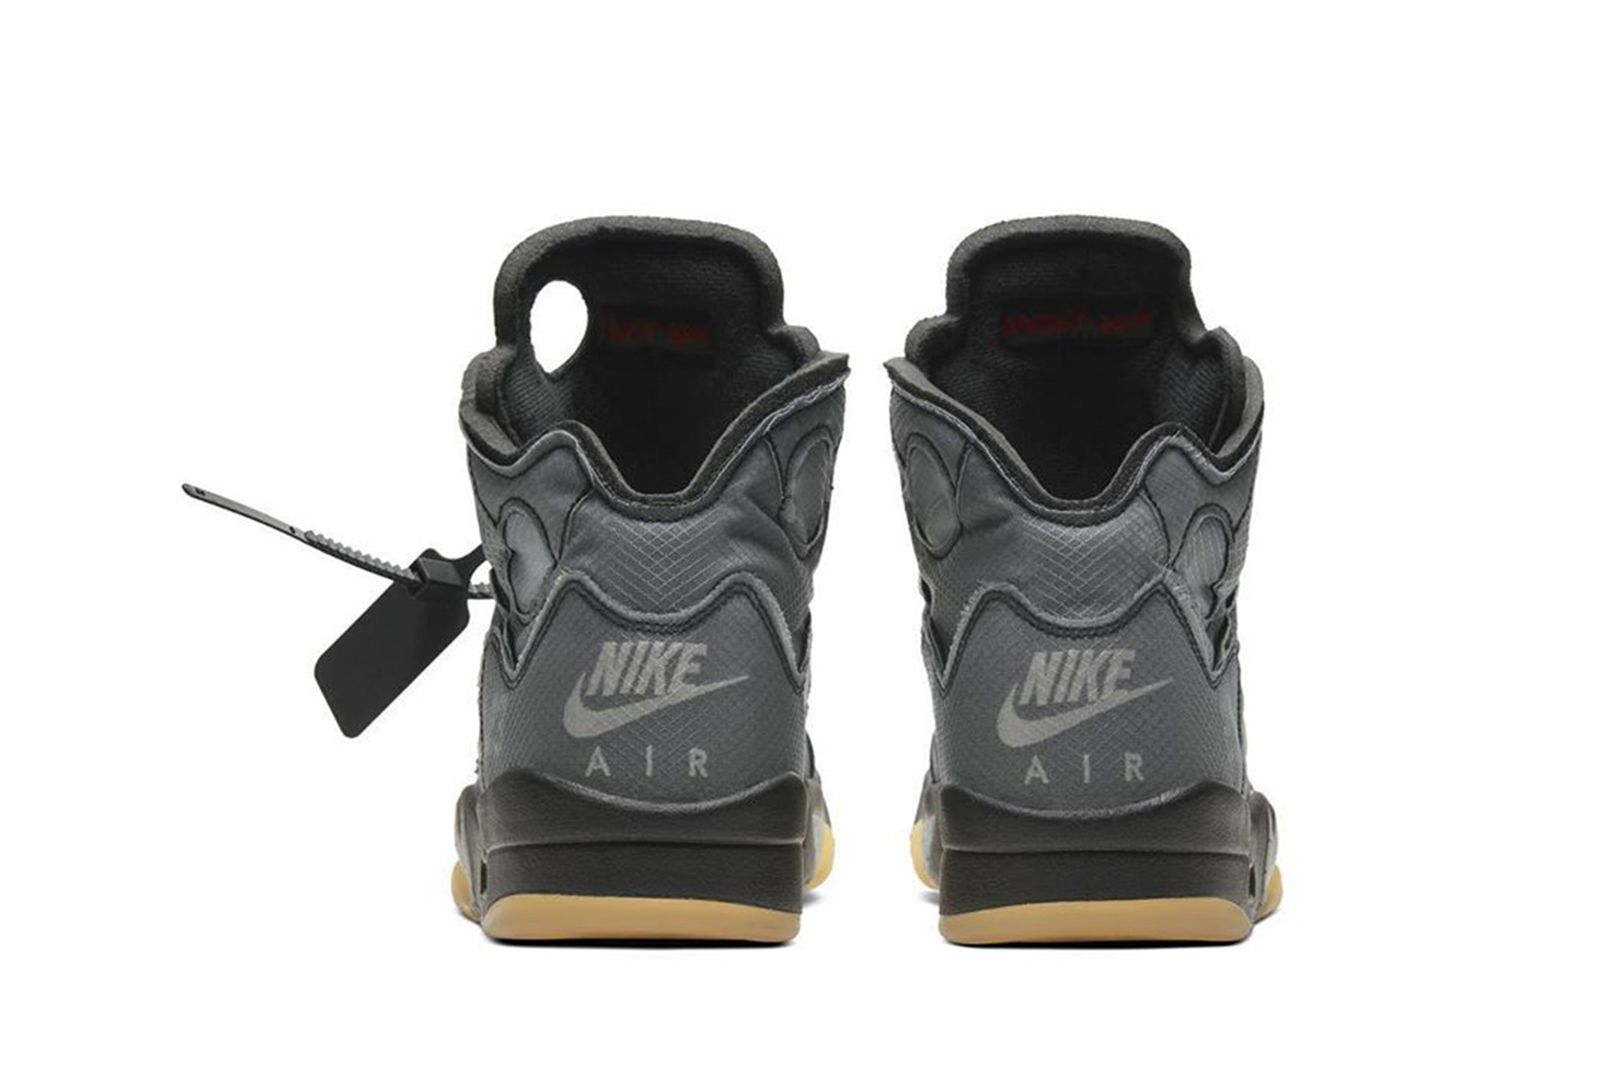 off-white-nike-air-jordan-5-release-date-price-official-product-03